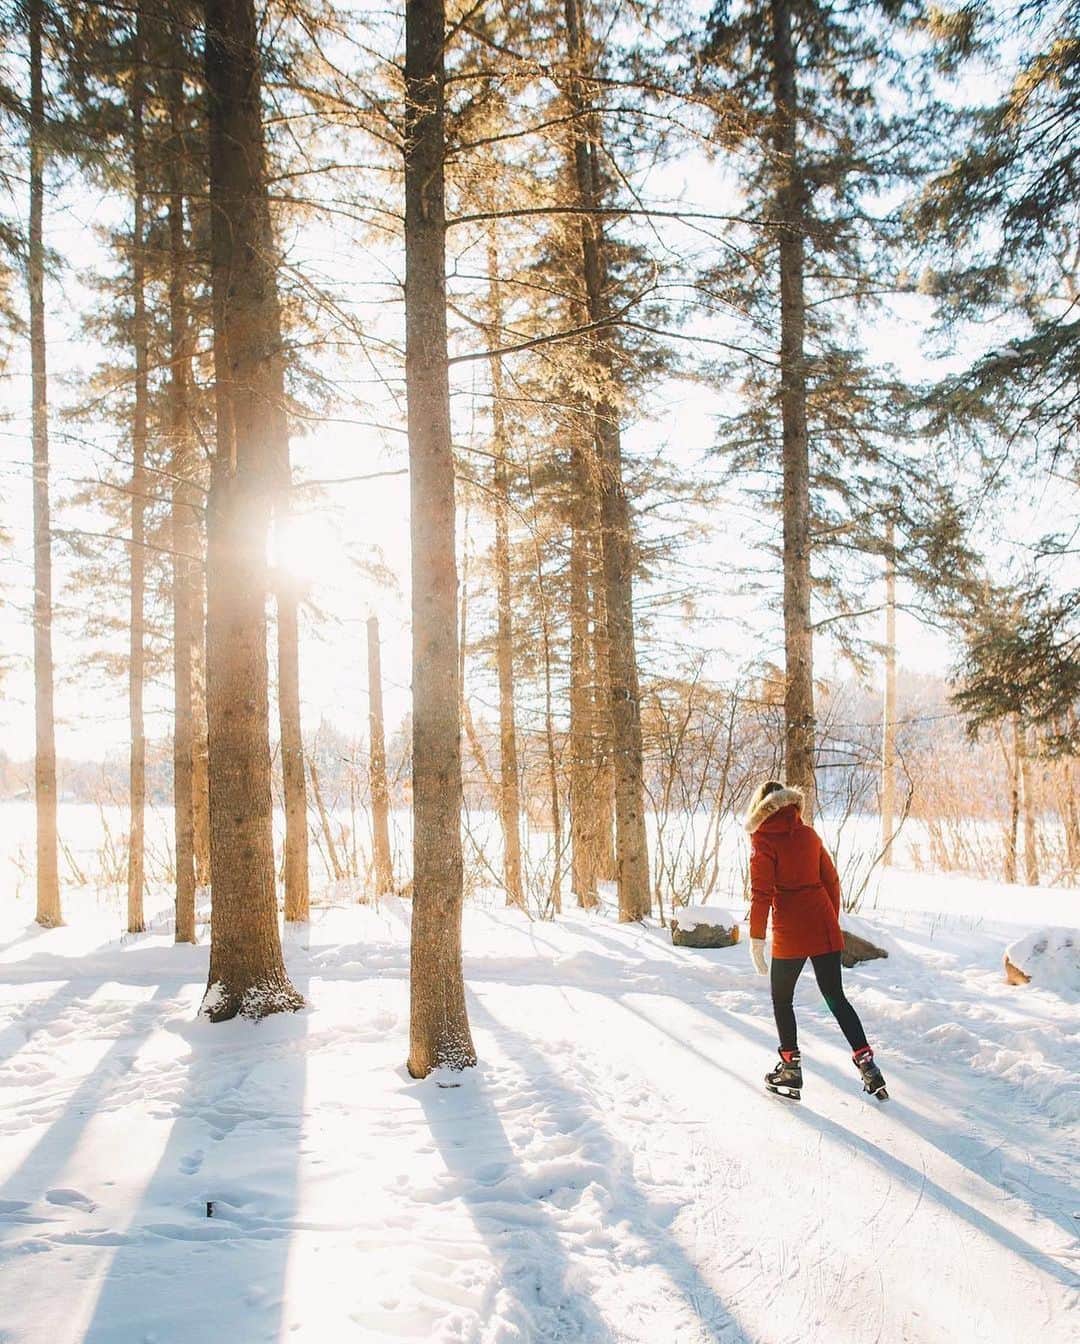 Explore Canadaさんのインスタグラム写真 - (Explore CanadaInstagram)「Today’s #CanadaSpotlight is on unique winter experiences in Canada! ⁠⠀⁠⠀ ⁠⠀⁠⠀ This Canada Spotlight is part two of a series of three on Canada’s unique winter experiences. Let us know which one you’d like to do more in the comments and we’ll make sure to do an in depth Canada Spotlight on that experience!⁠⠀⁠⠀ ⁠⠀ ⛸️ No matter where you find yourself in Canada you can probably find an area to ice skate close by. One of the best aspects of ice skating in Canada is that the rinks or trails are often as varied and diverse as Canada’s geography. Whether it’s skating the over 10km (6.2mi) Red River Mutual trail in Winnipeg or the charming Olympic Plaza in Downtown Calgary you’re bound to experience unique sights and sounds no matter where you go.⁠⠀ ⁠⠀ Pro tip: If you’re new to skating don’t fret! There are lots of tools and friendly Canadians available to help you get the hang of this winter pastime. ⁠⠀ ⁠⠀ 🧊 Strap on some crampons and take a step outside your ordinary with ice climbing! In Canada you can experience ice climbing throughout the country, however, Canada’s Rocky Mountains are renowned for having some of the best ice climbing offerings in the world. From ascending ice covered rock walls ice to scaling frozen waterfalls ice climbing is bound to provide a rewarding challenge for participants. ⁠⠀ ⁠⠀ Pro tip: If you're new to ice climbing it’s recommended to get started with a guided tour and lesson with an expert like @rockaboo_mountain_adventures.⁠⠀ ⁠⠀ *Know before you go! Check the most up-to-date travel restrictions and border closures before planning your trip and if you're travelling in Canada, download the COVID Alert app to your mobile device.*⁠⠀ ⁠⠀ 📷: @jesse.ell @travelmanitoba @austin.mackay @braids222 @aratson @argenel⁠⠀ ⁠⠀ 📍: ⁠⠀ 1. @tourismcalgary @travelalberta⁠⠀ 2. @tourismwinnipeg @travelmanitoba⁠⠀ 3. Riding Mountain National Park @travelmanitoba⁠⠀ 4. @tourismjasper @travelalberta⁠⠀ 5. Garibaldi Provincial Park @hellobc⁠⠀ 6. @tourismjasper @travelalberta⁠⠀ ⁠⠀ #ExploreCanada #CanadaNice⁠⠀」12月18日 3時15分 - explorecanada